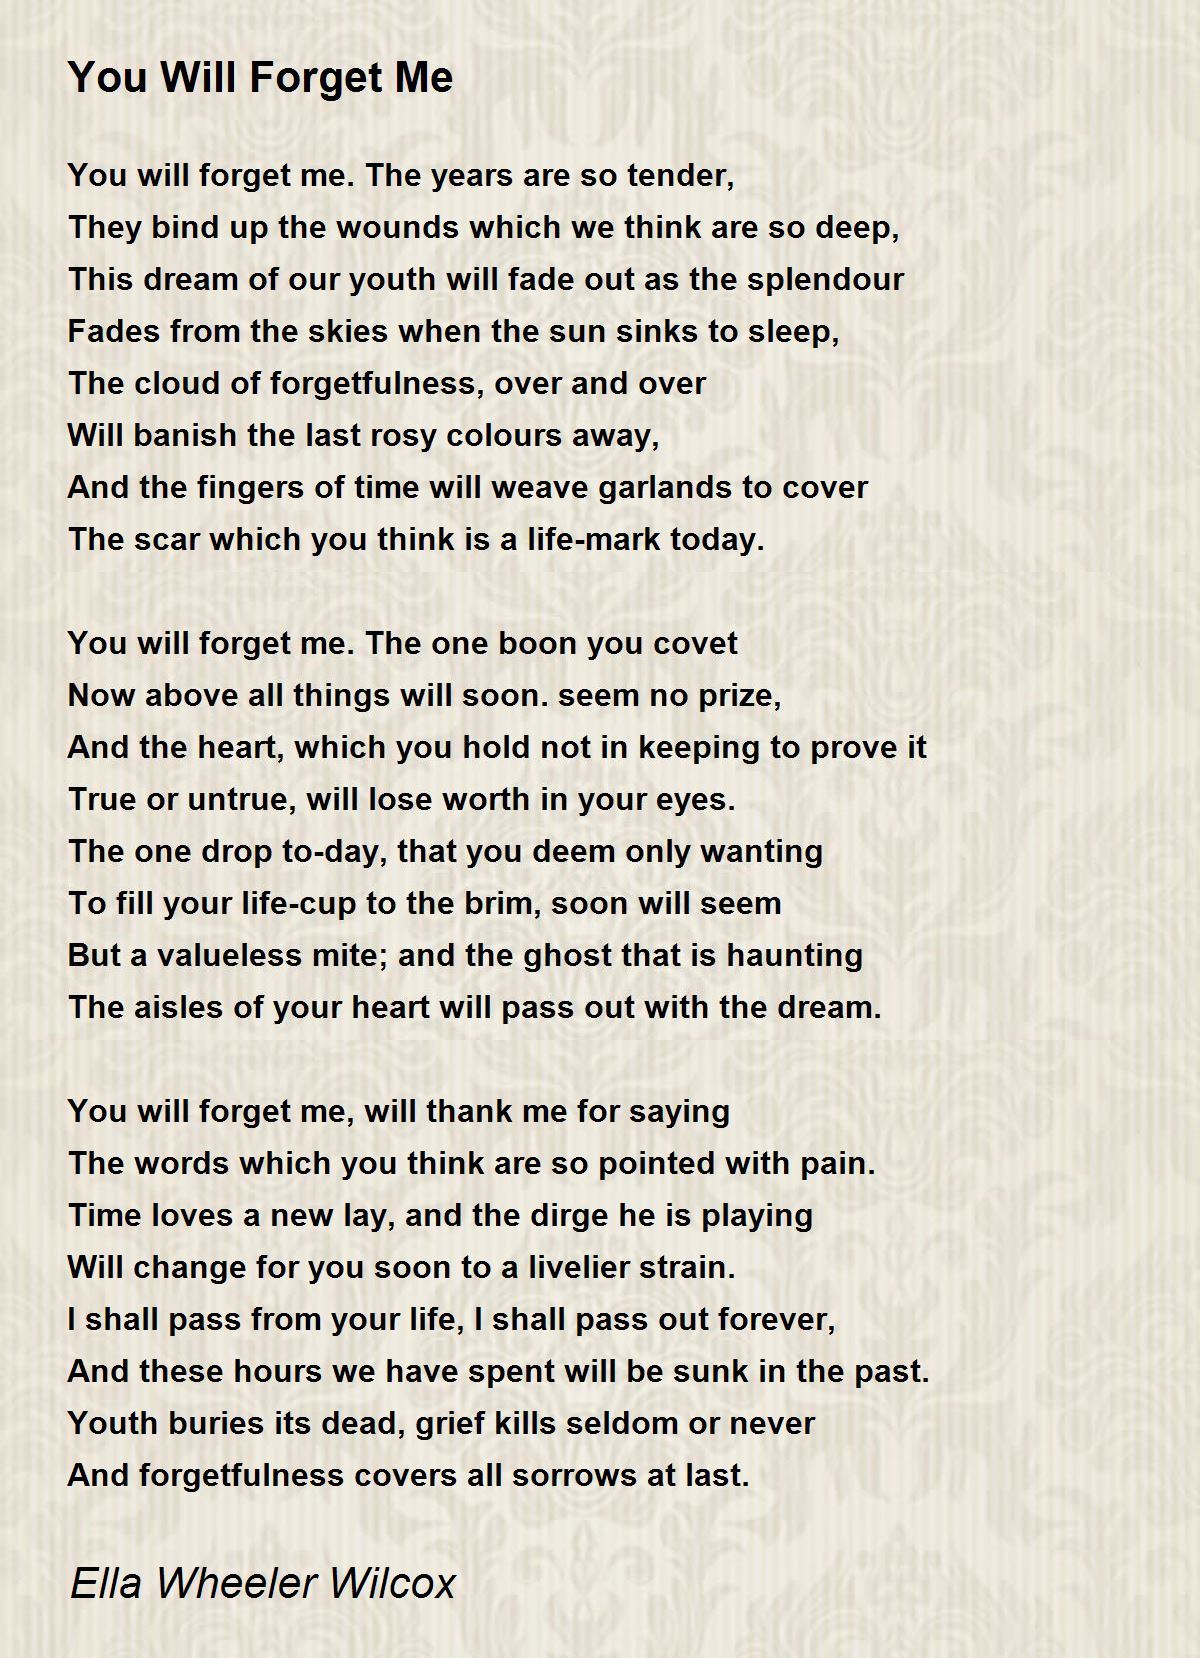 You Will Forget Me Poem by Ella Wheeler Wilcox - Poem Hunter